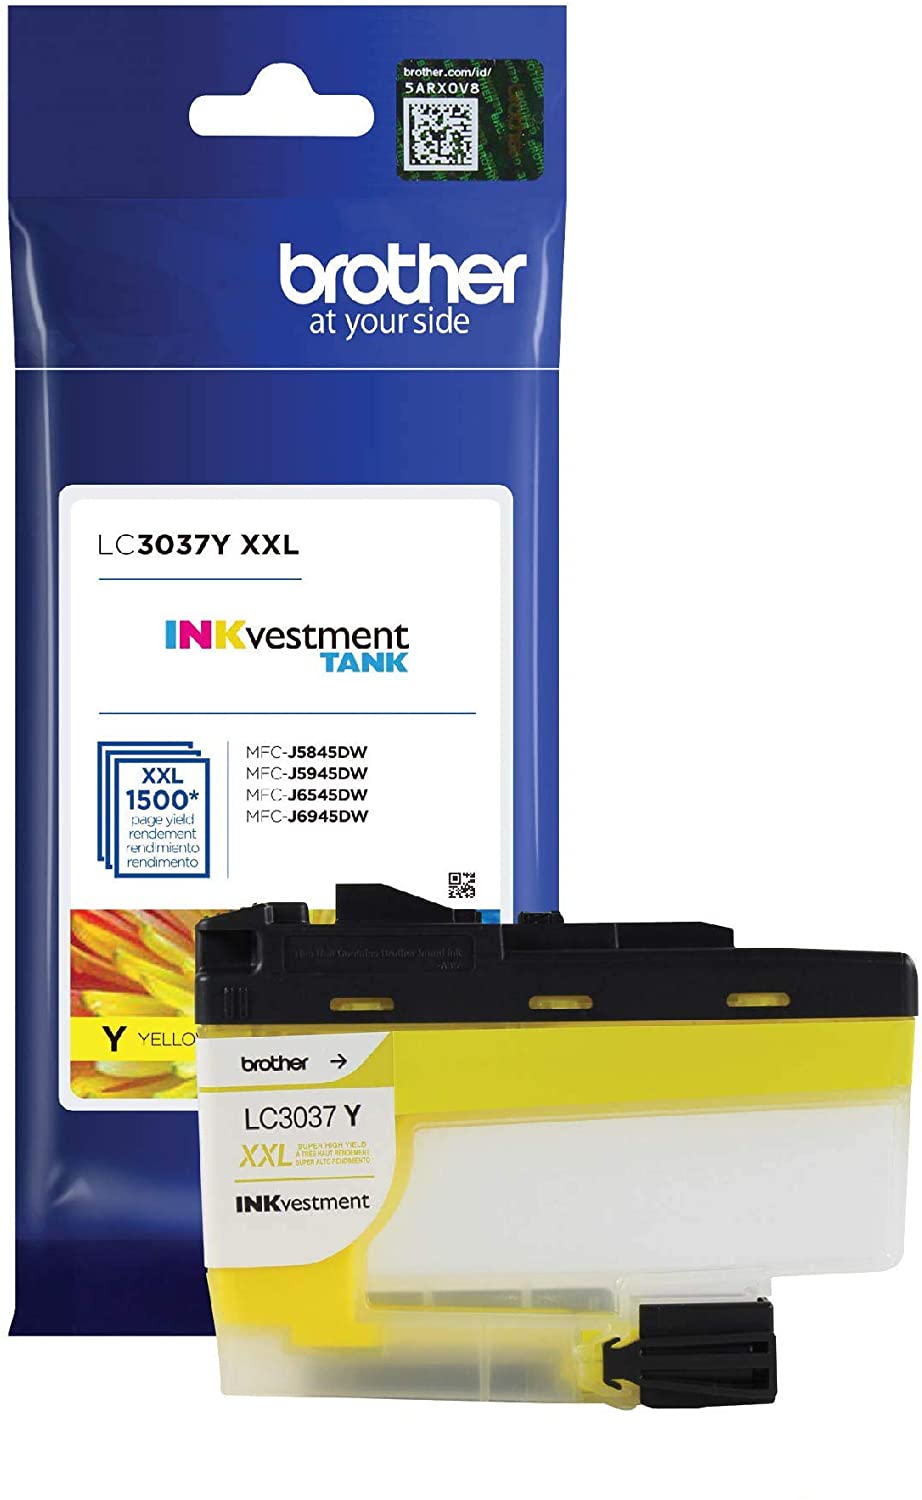 Absolute Toner Brother Genuine OEM Yellow LC3037Y Super High Yield Tank Ink Cartridge | LC3037YS Original Brother Cartridges